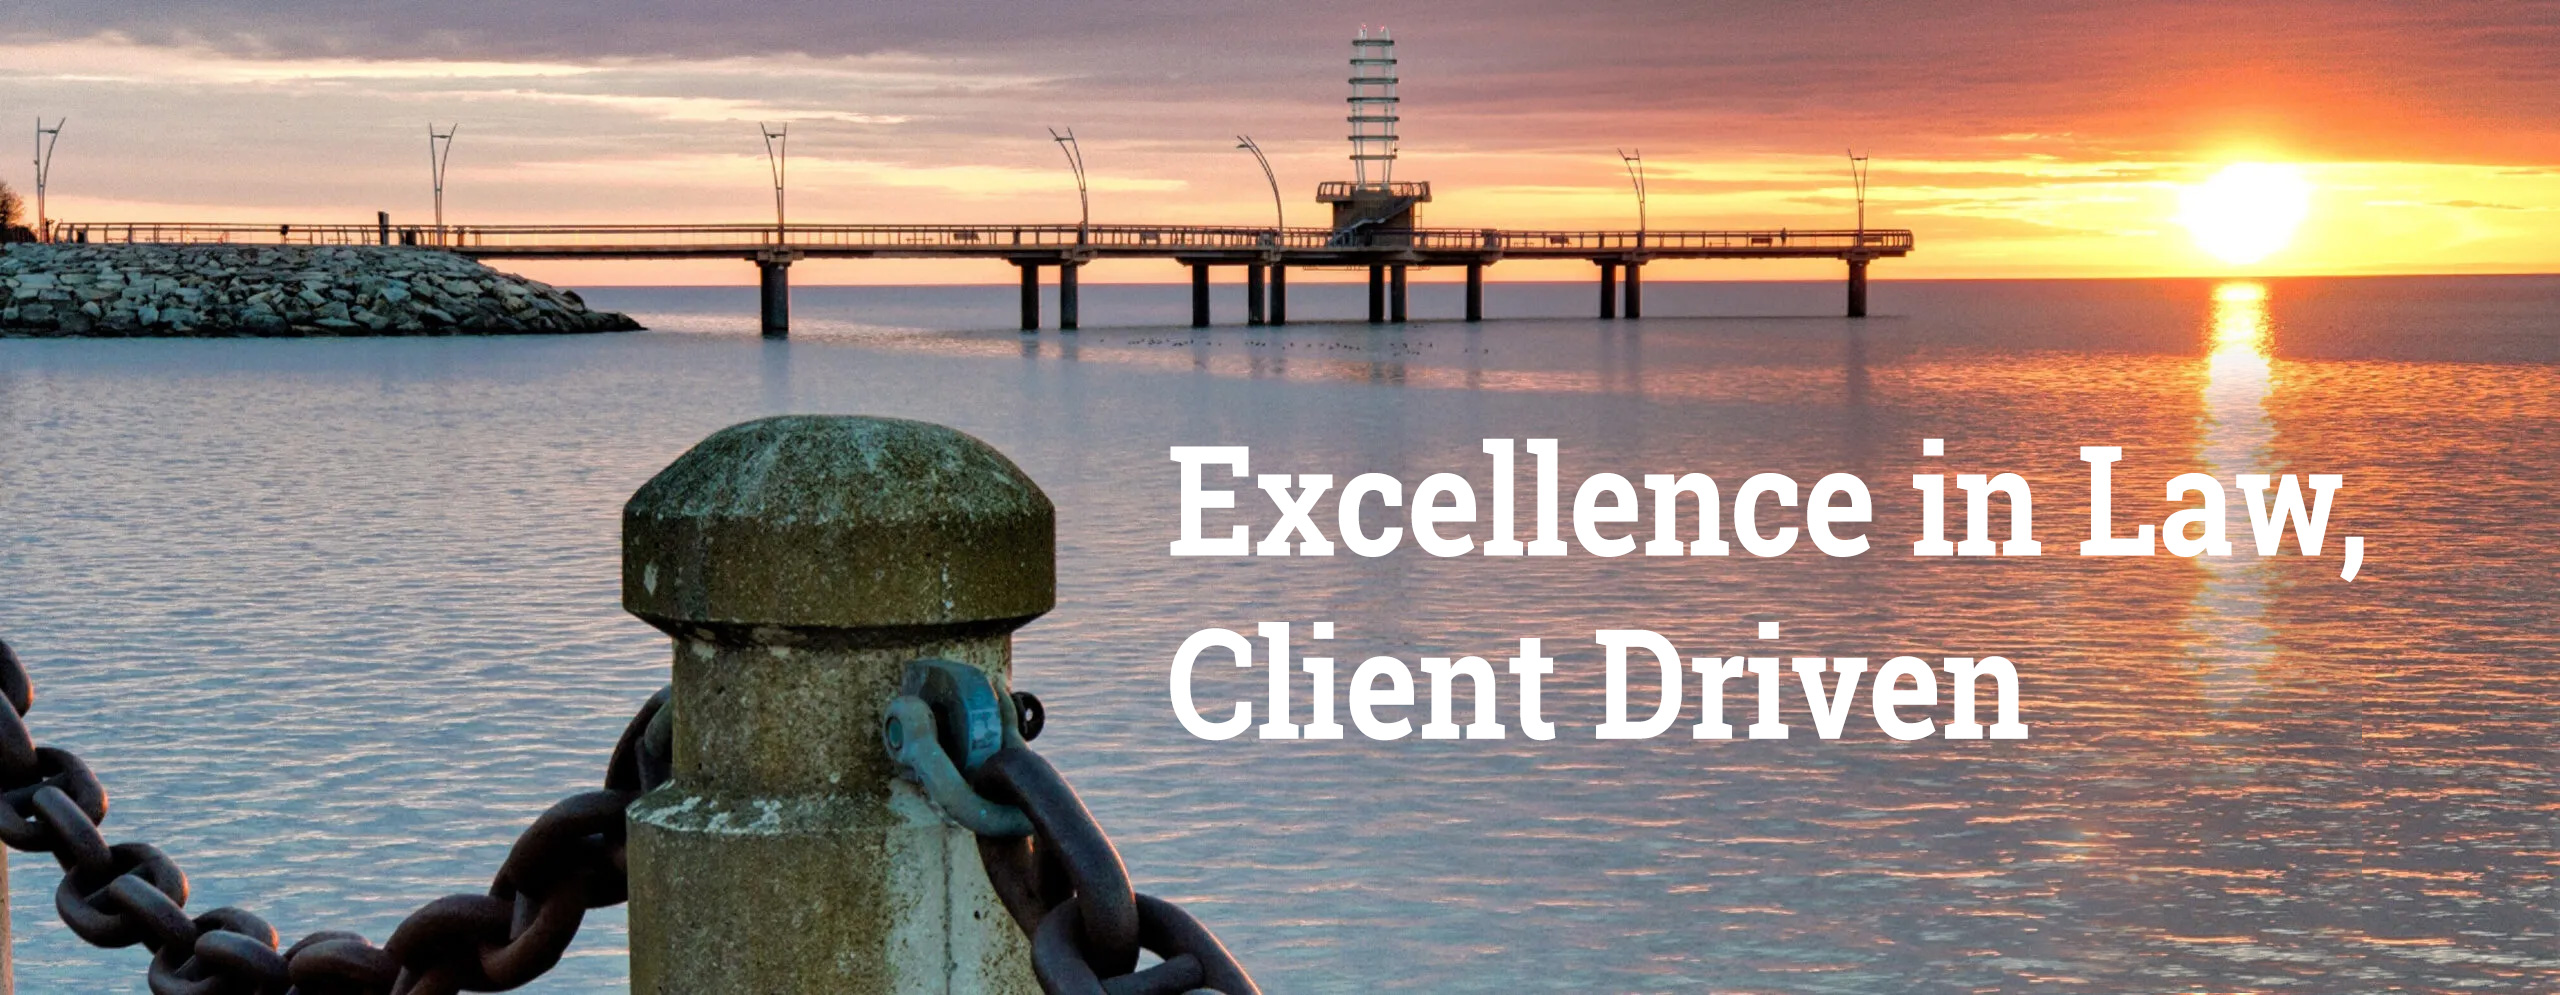 GGS LAW, Burlington, Lawyers, Excellence in Law, Client Driven